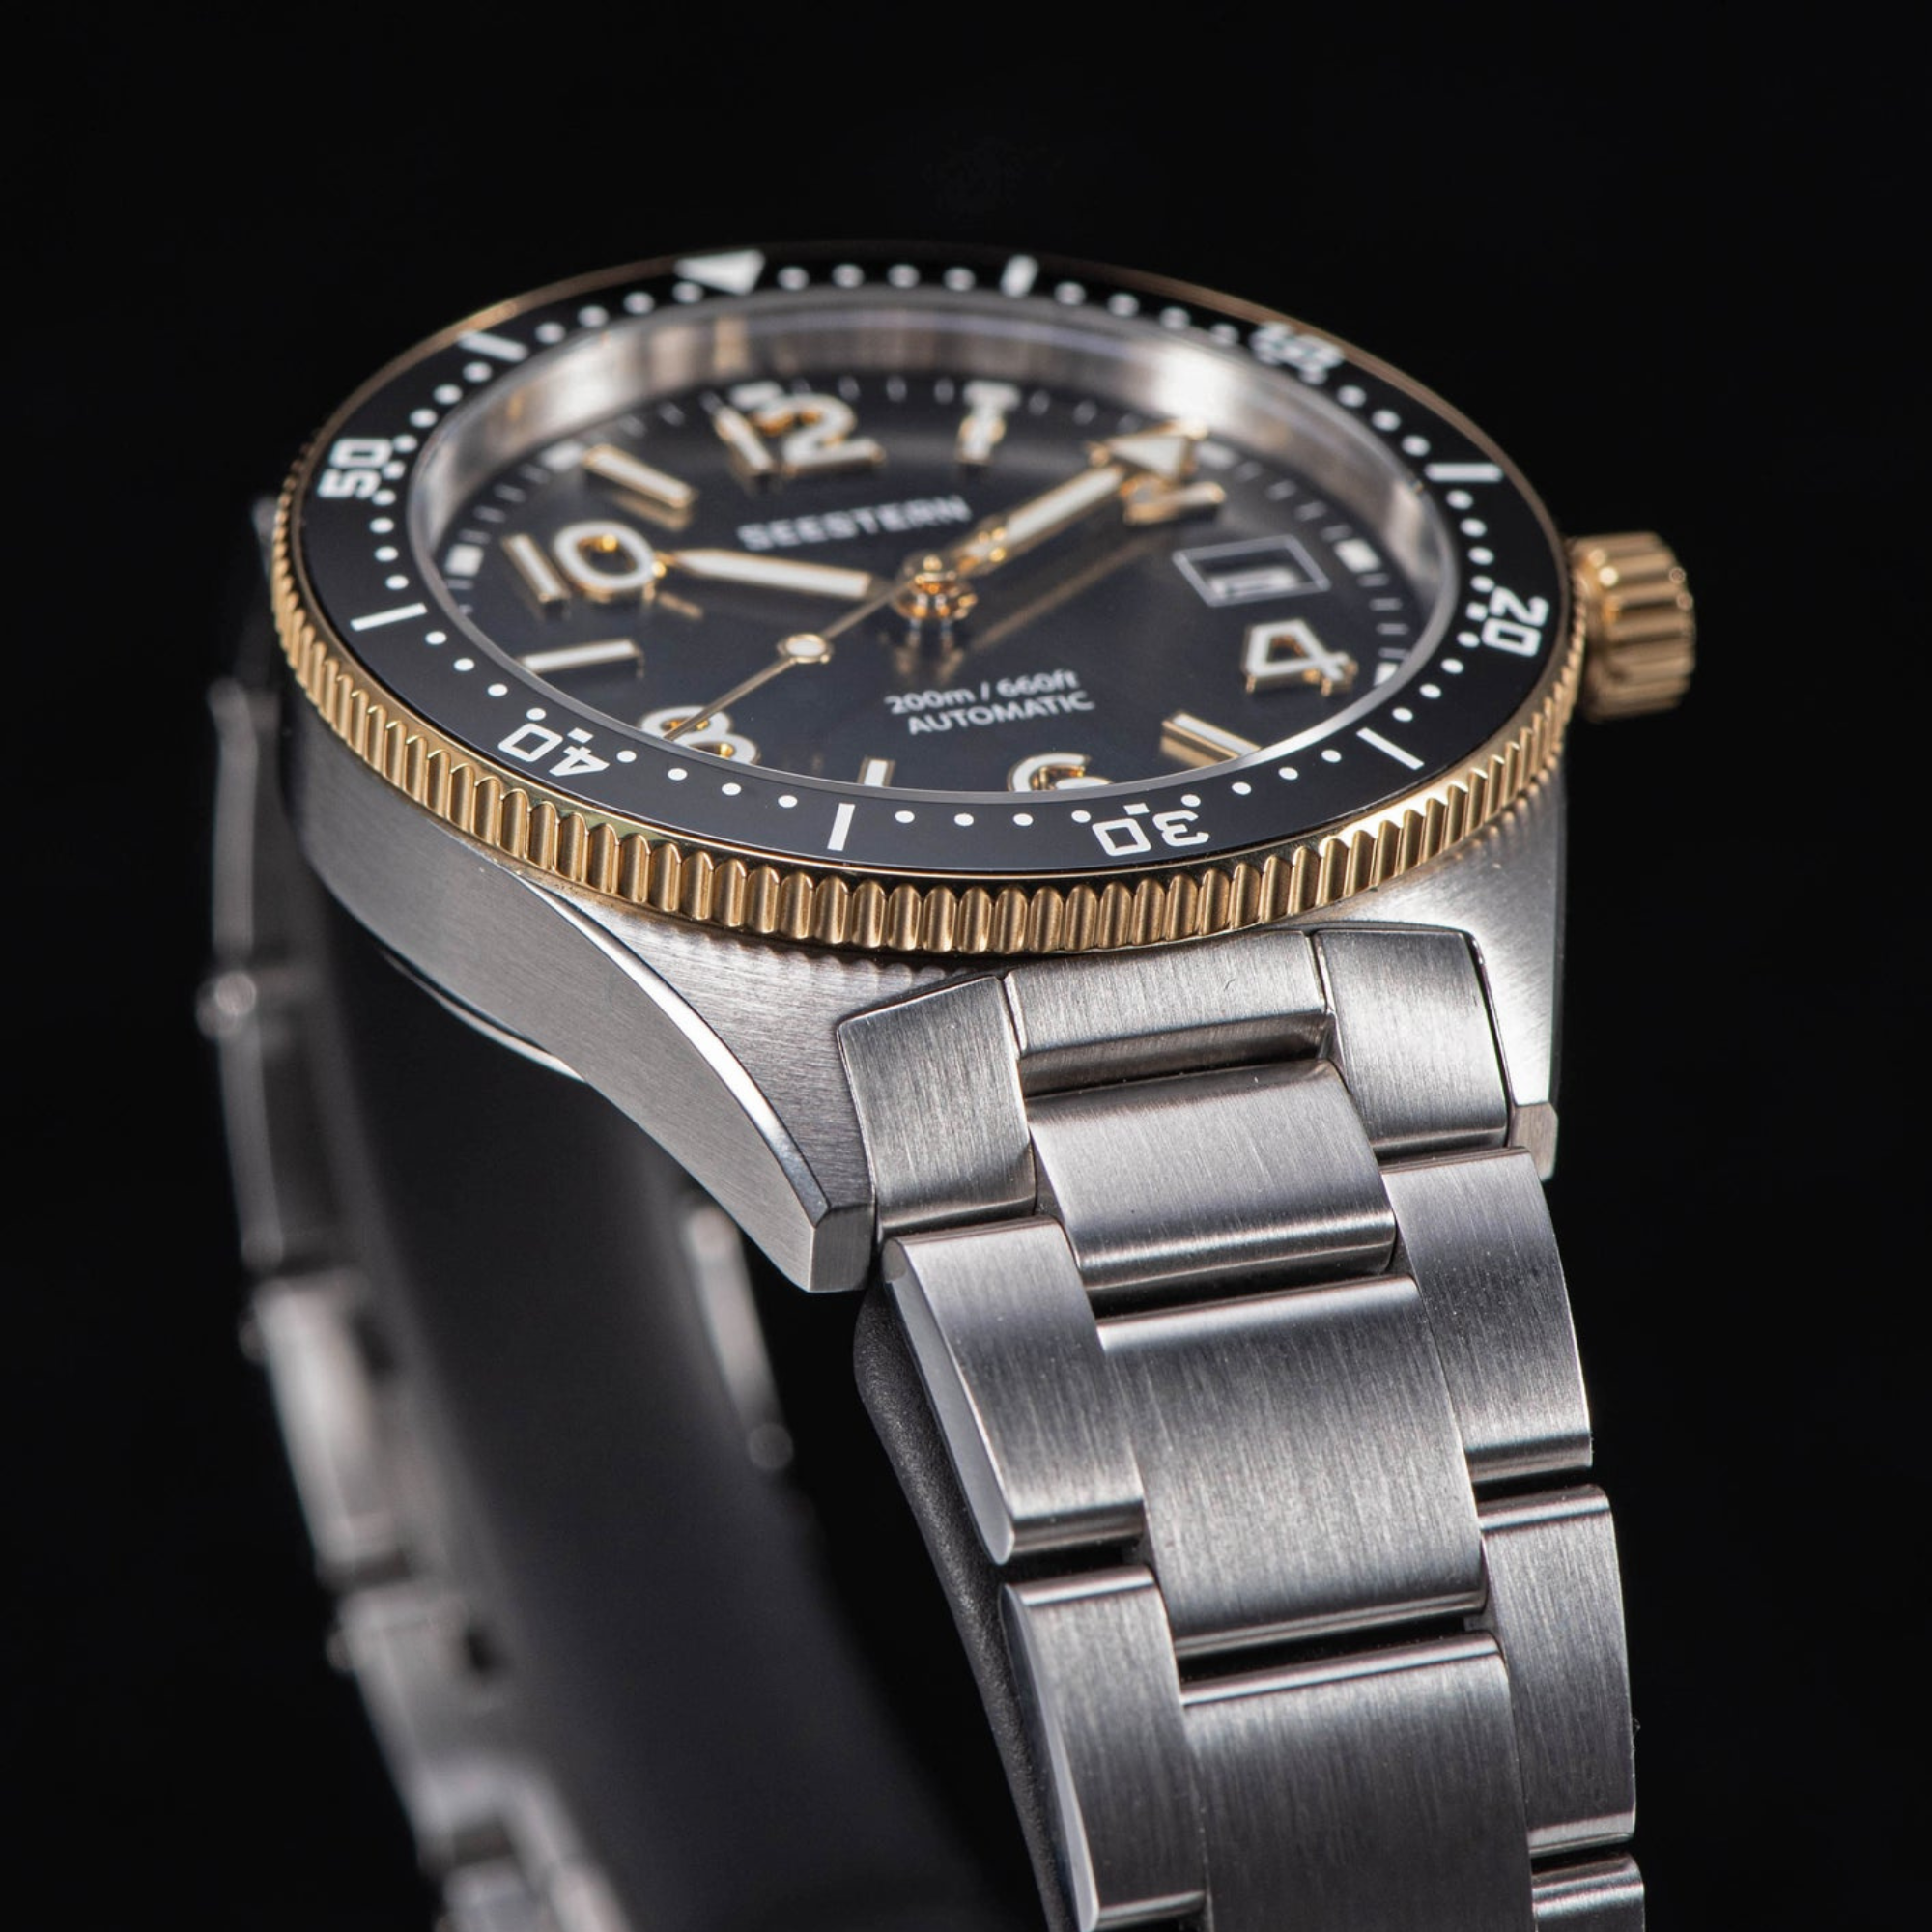 Seestern 434 Professional Diver Automatic 200m Water Resistant